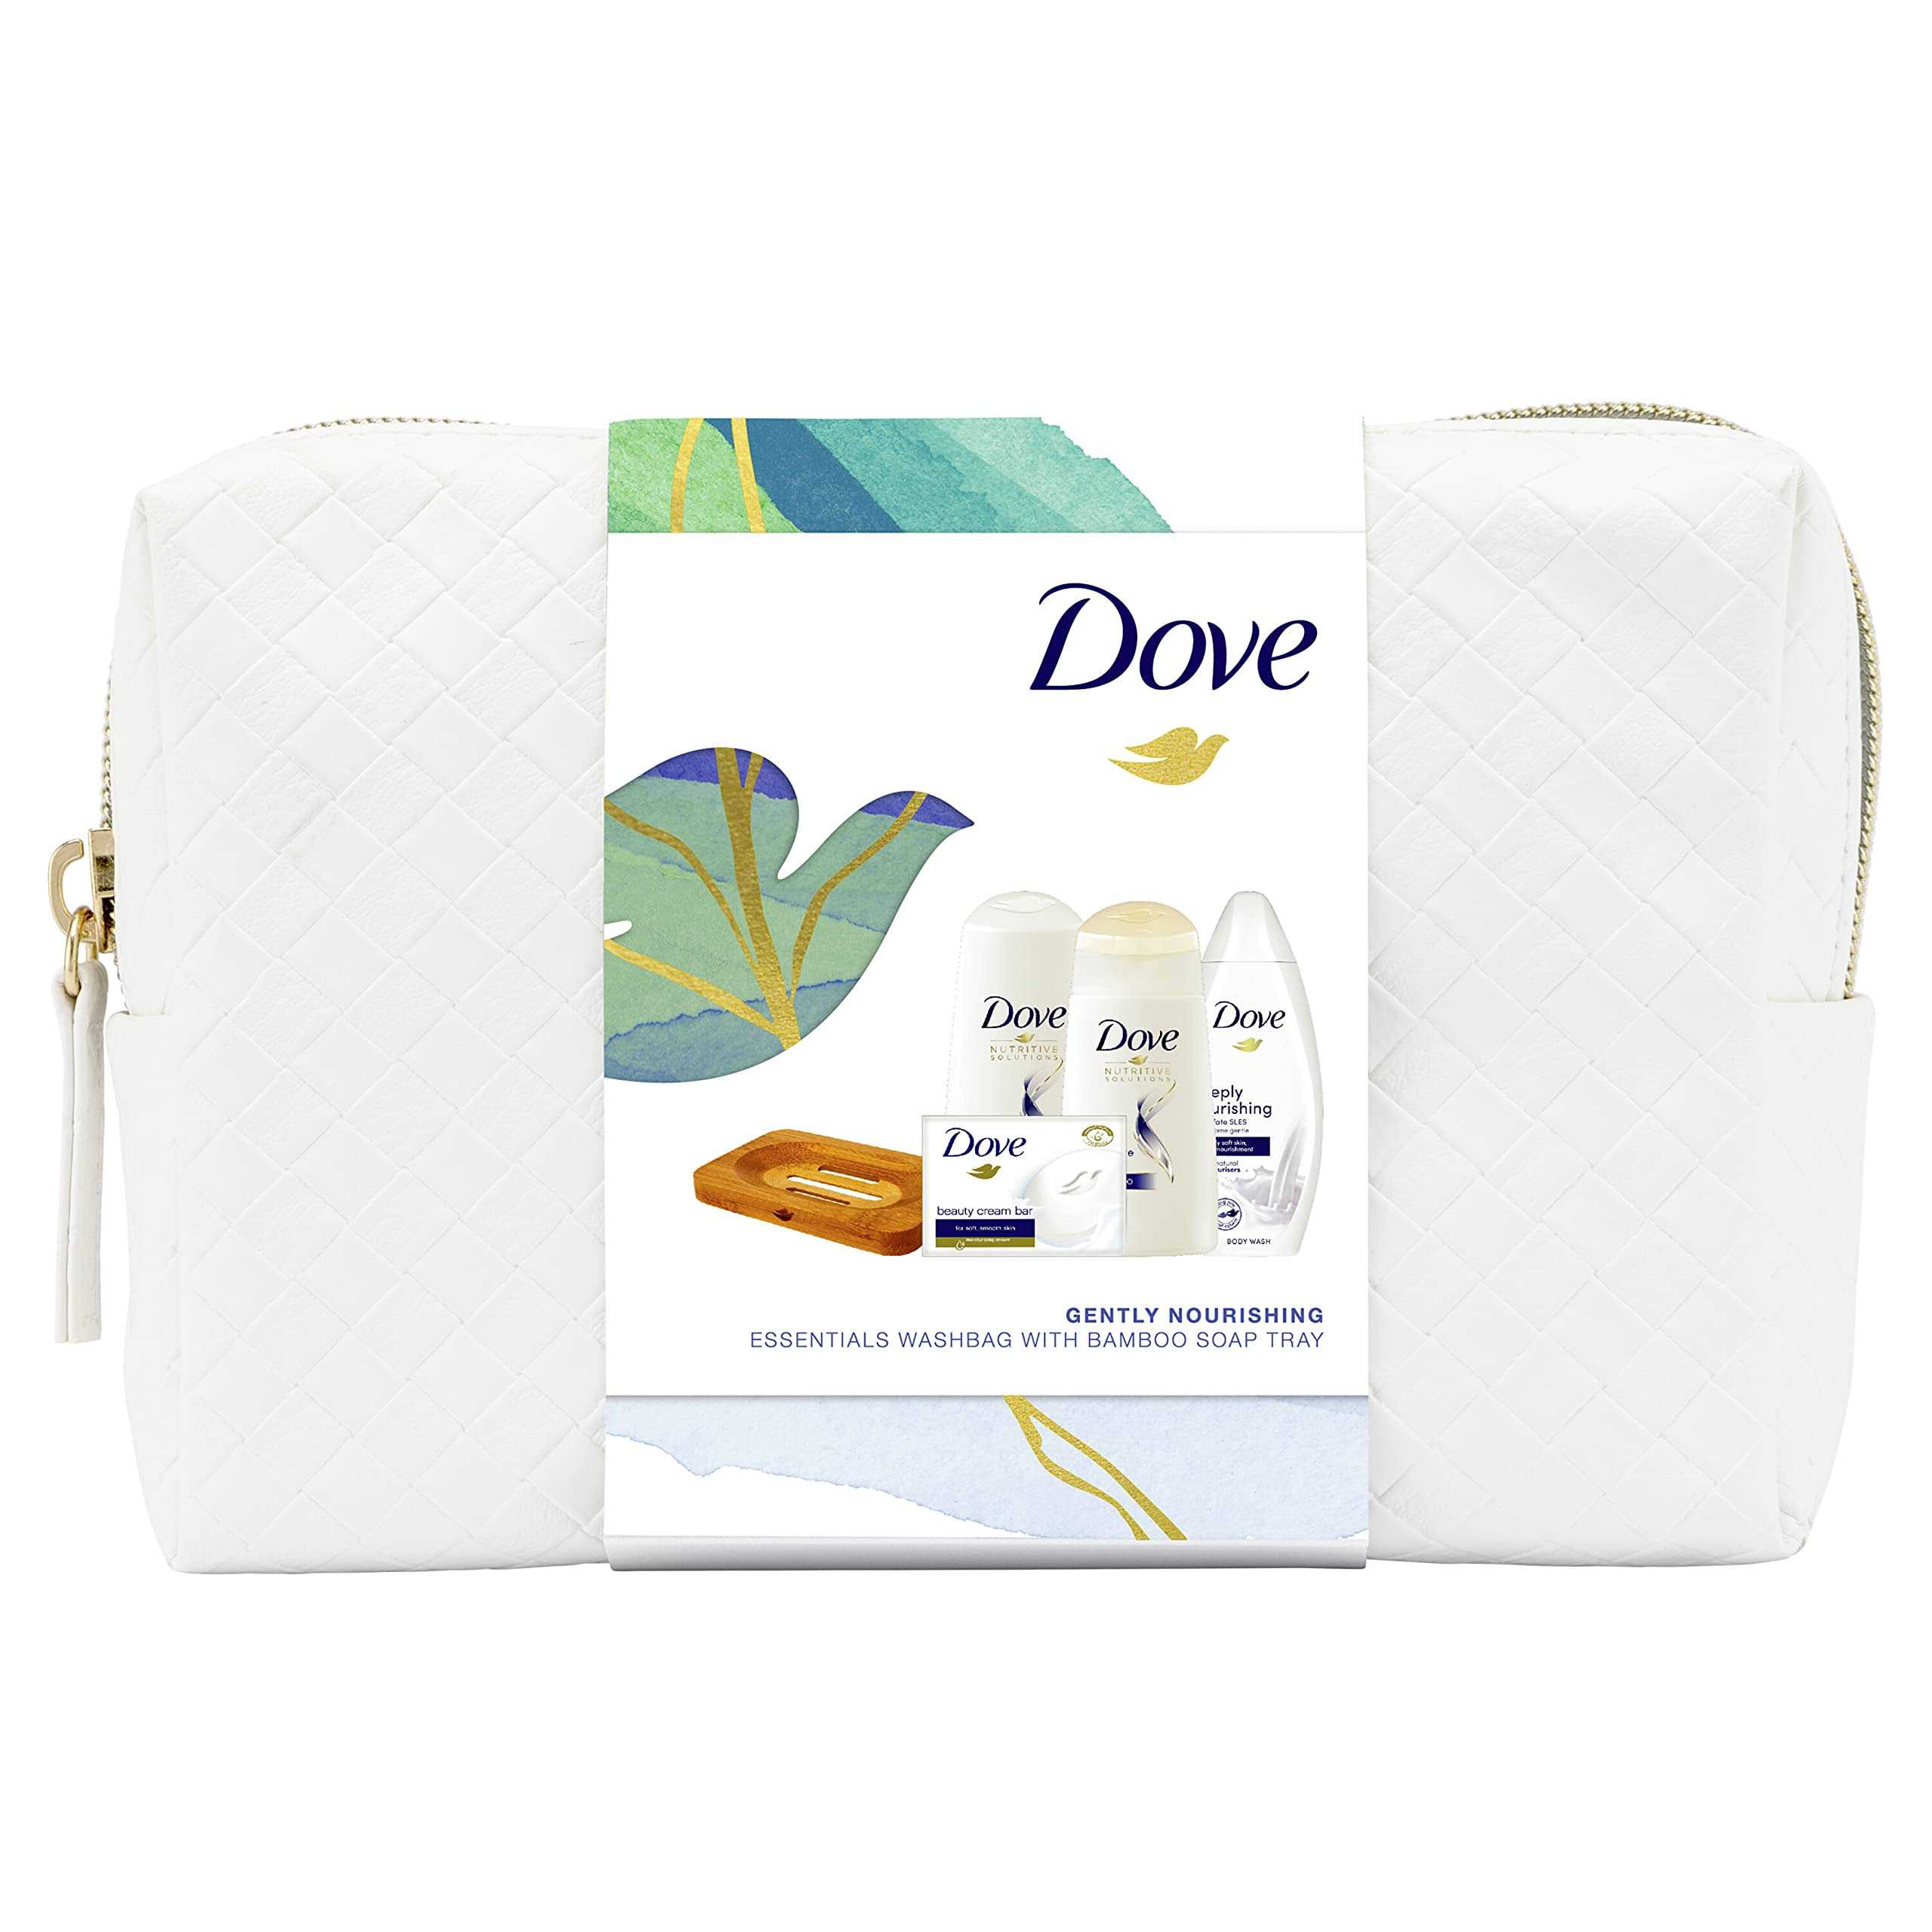 2x Dove Gently Nourishing Essentials Washbag Gift Set for her with Bamboo Soap Tray